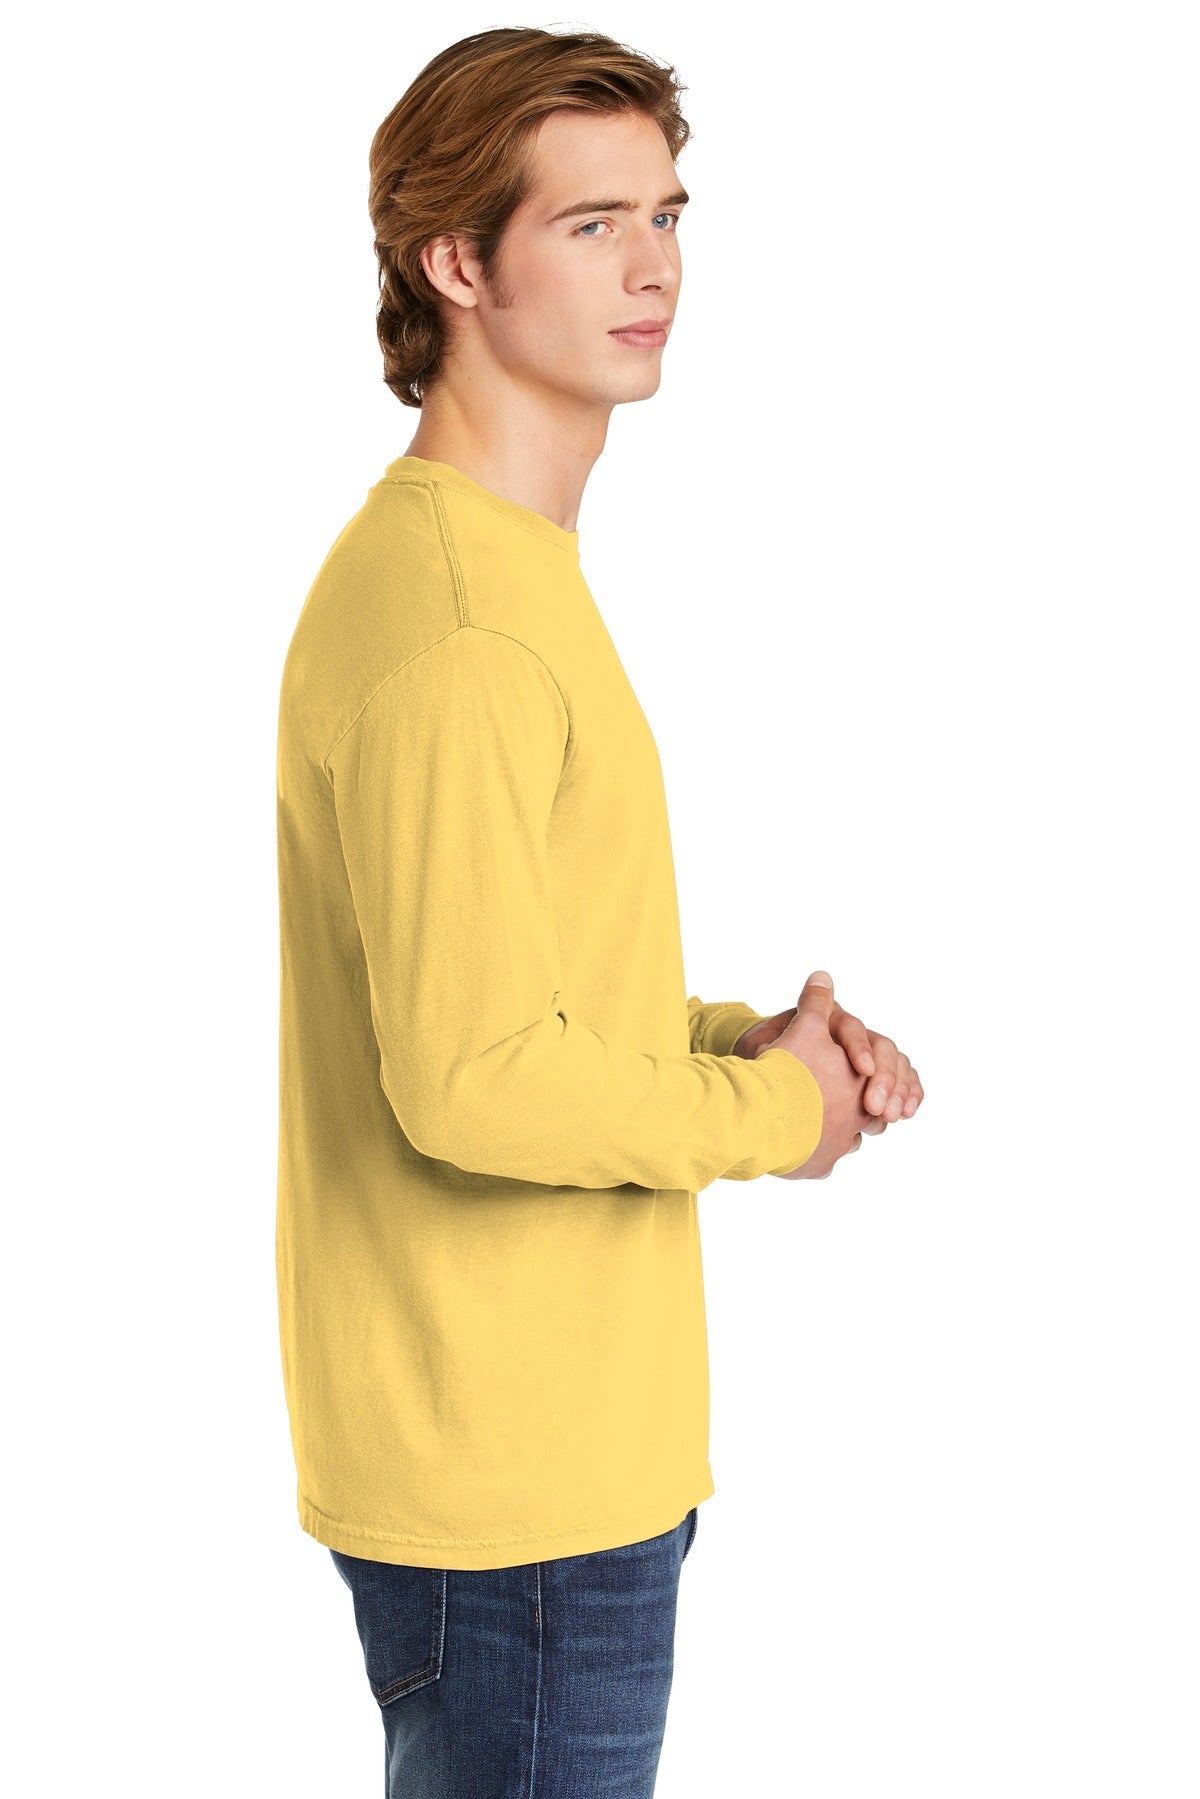 COMFORT COLORS ® Heavyweight Ring Spun Long Sleeve Tee. 6014 [Butter] - DFW Impression